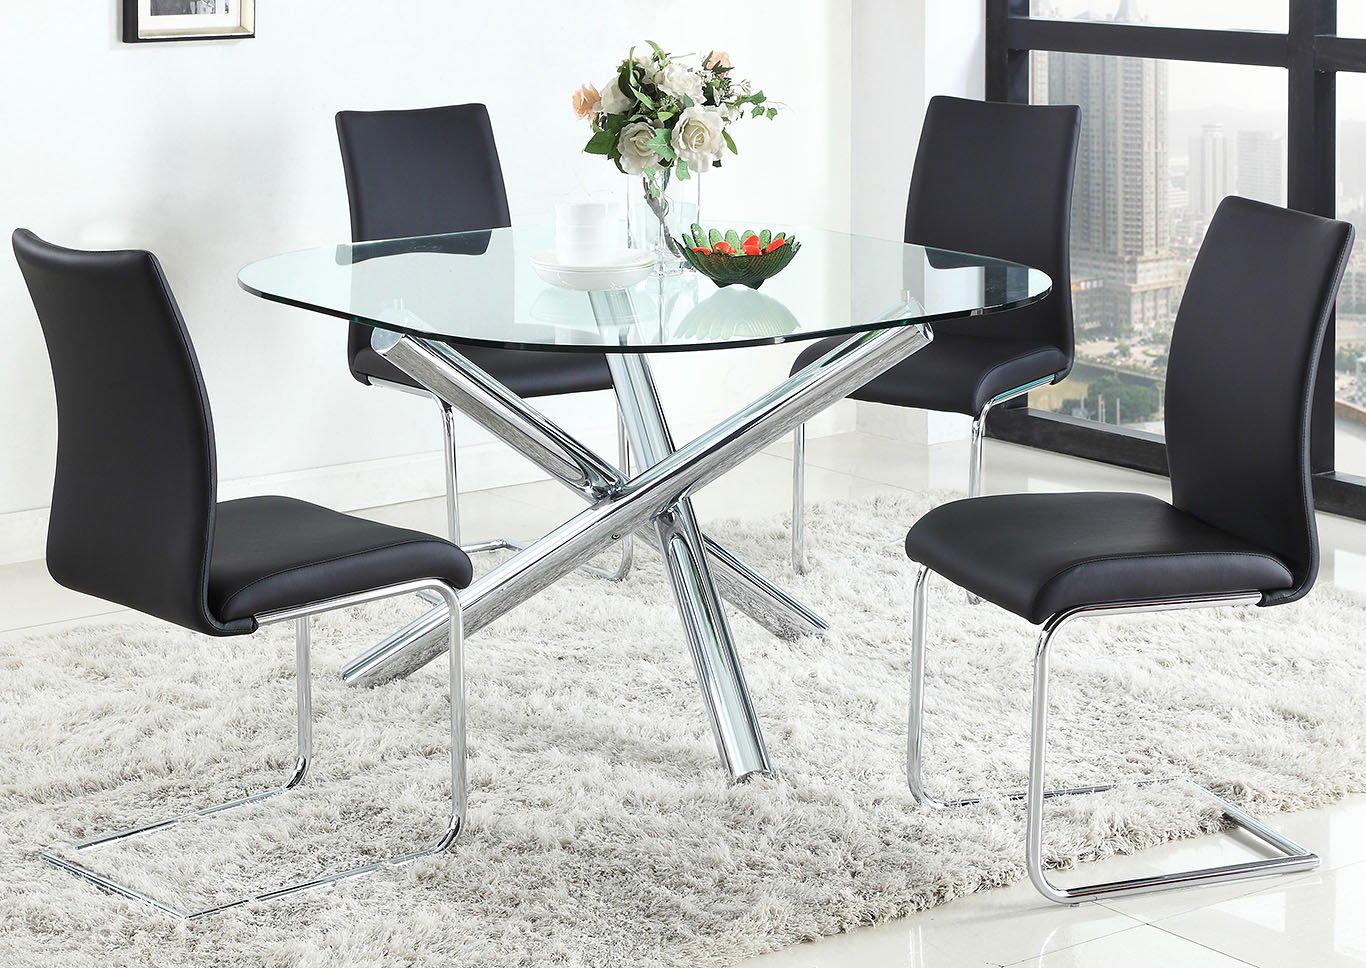 Leatrace Dining Table w/4 Jane Black Dining Chairs,Chintaly Imports